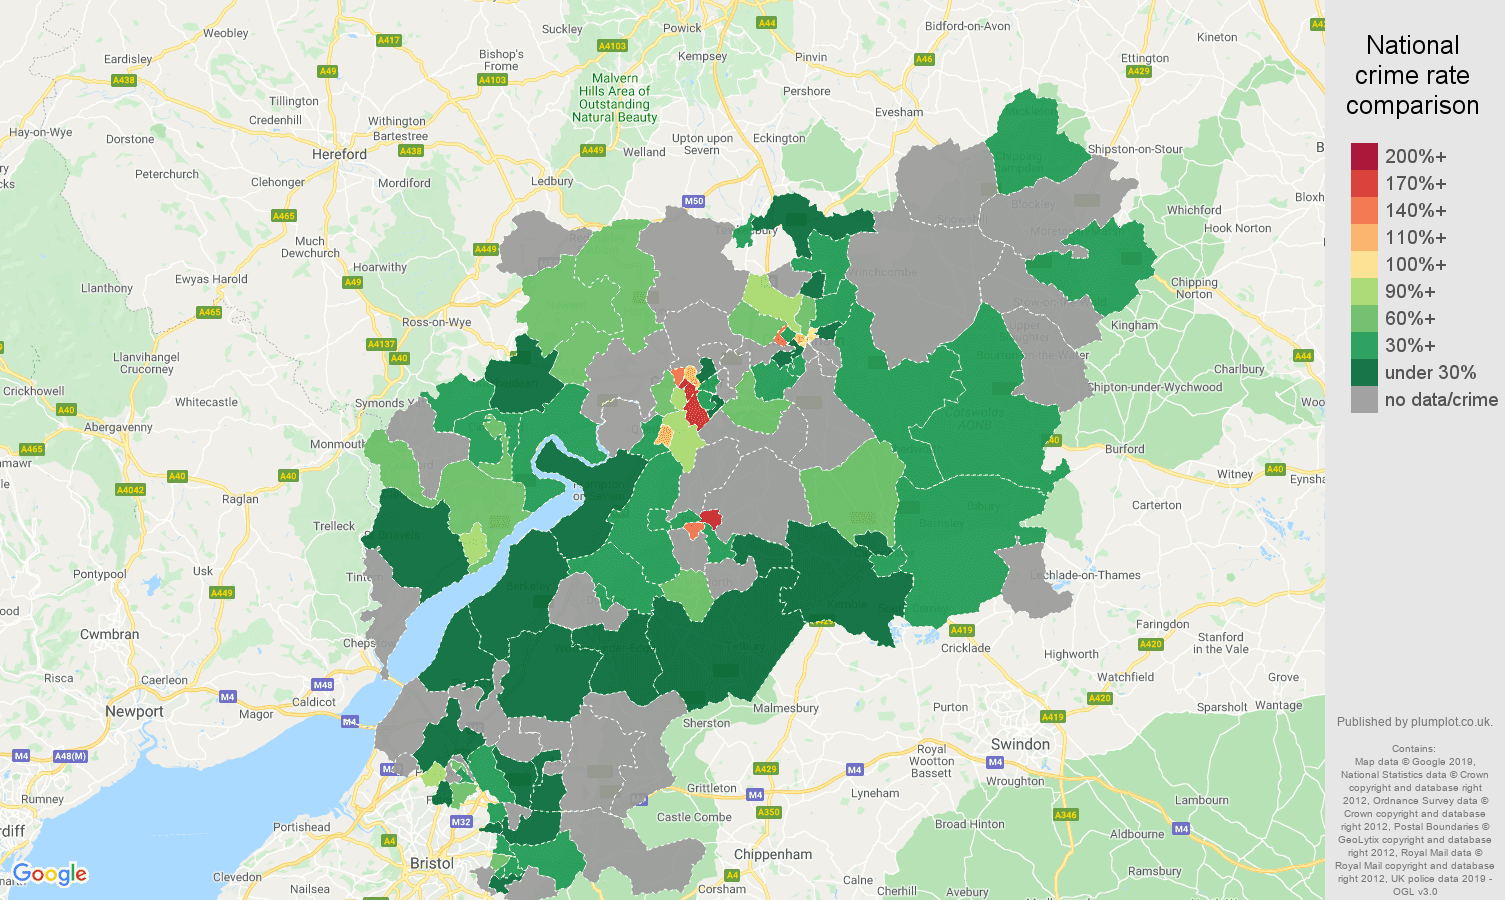 Gloucestershire possession of weapons crime rate comparison map